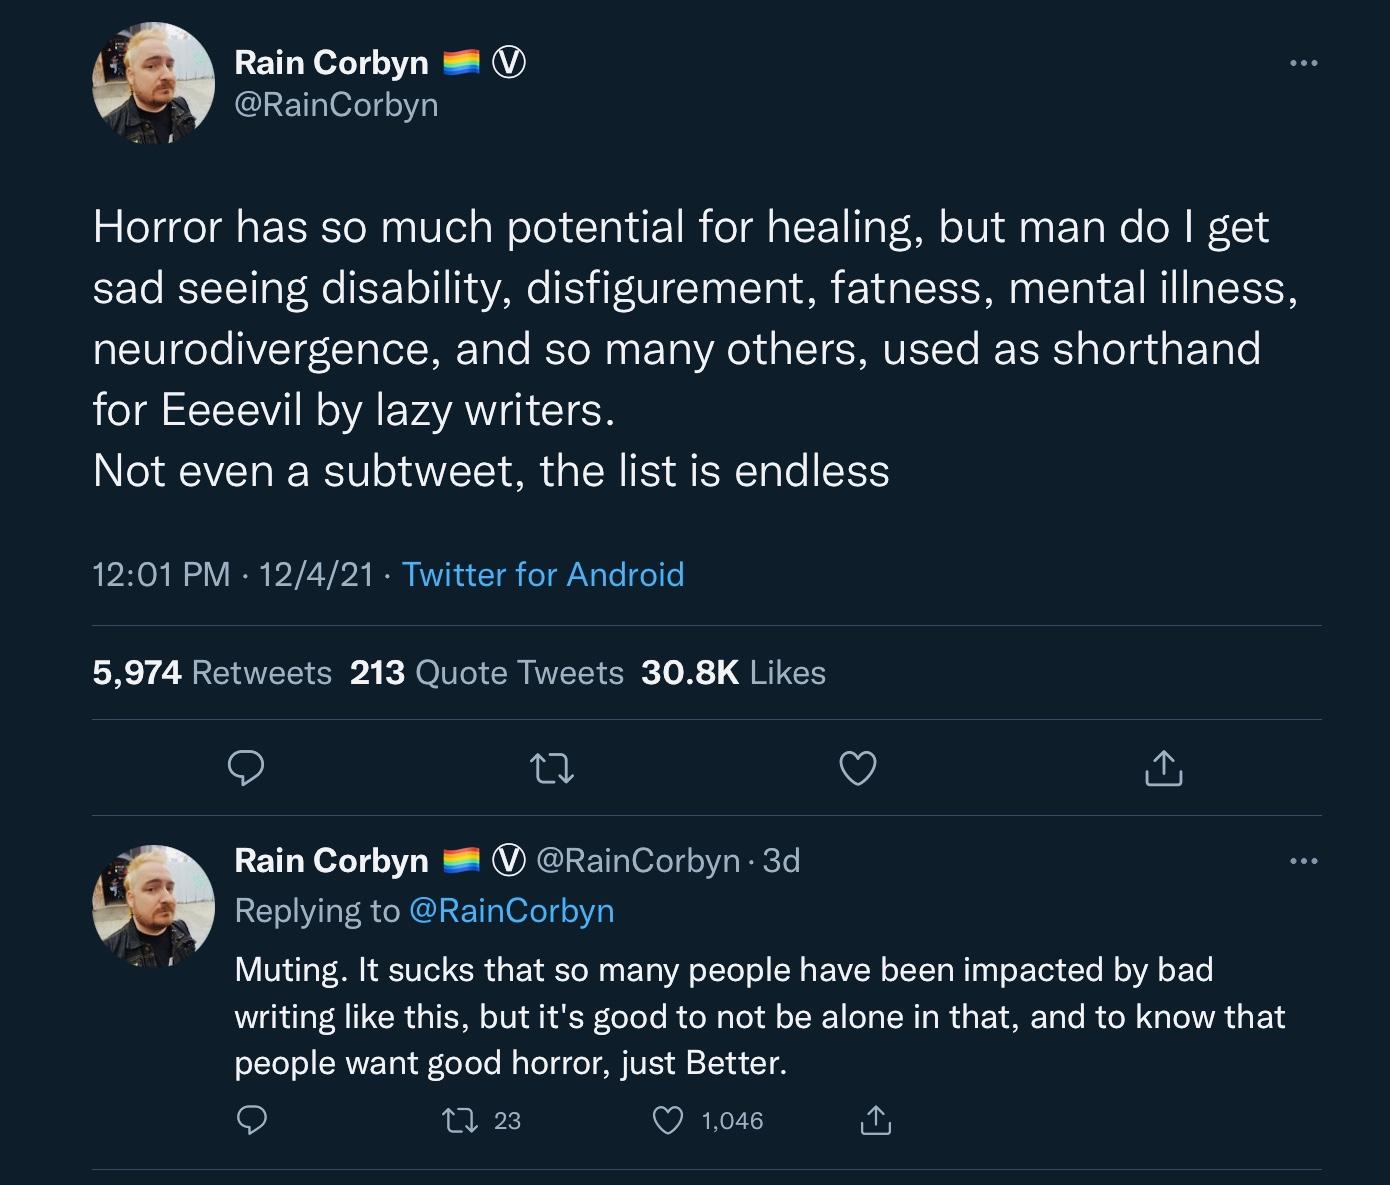 Tweets by @RainCorbyn on December 4, 2021 say: Horror has so much potential for healing, but man do I get sad seeing disability, disfigurement, fatness, mental illness, neurodivergence, and so many othesr, used as shorthand for Eeeevil by lazy writers.
Not even a subtweet, the list is endless

Muting. It sucks that so many people have been impacted by bad writing like this, but it's good not to be alone in that, and to know that people want good horror, just Better.